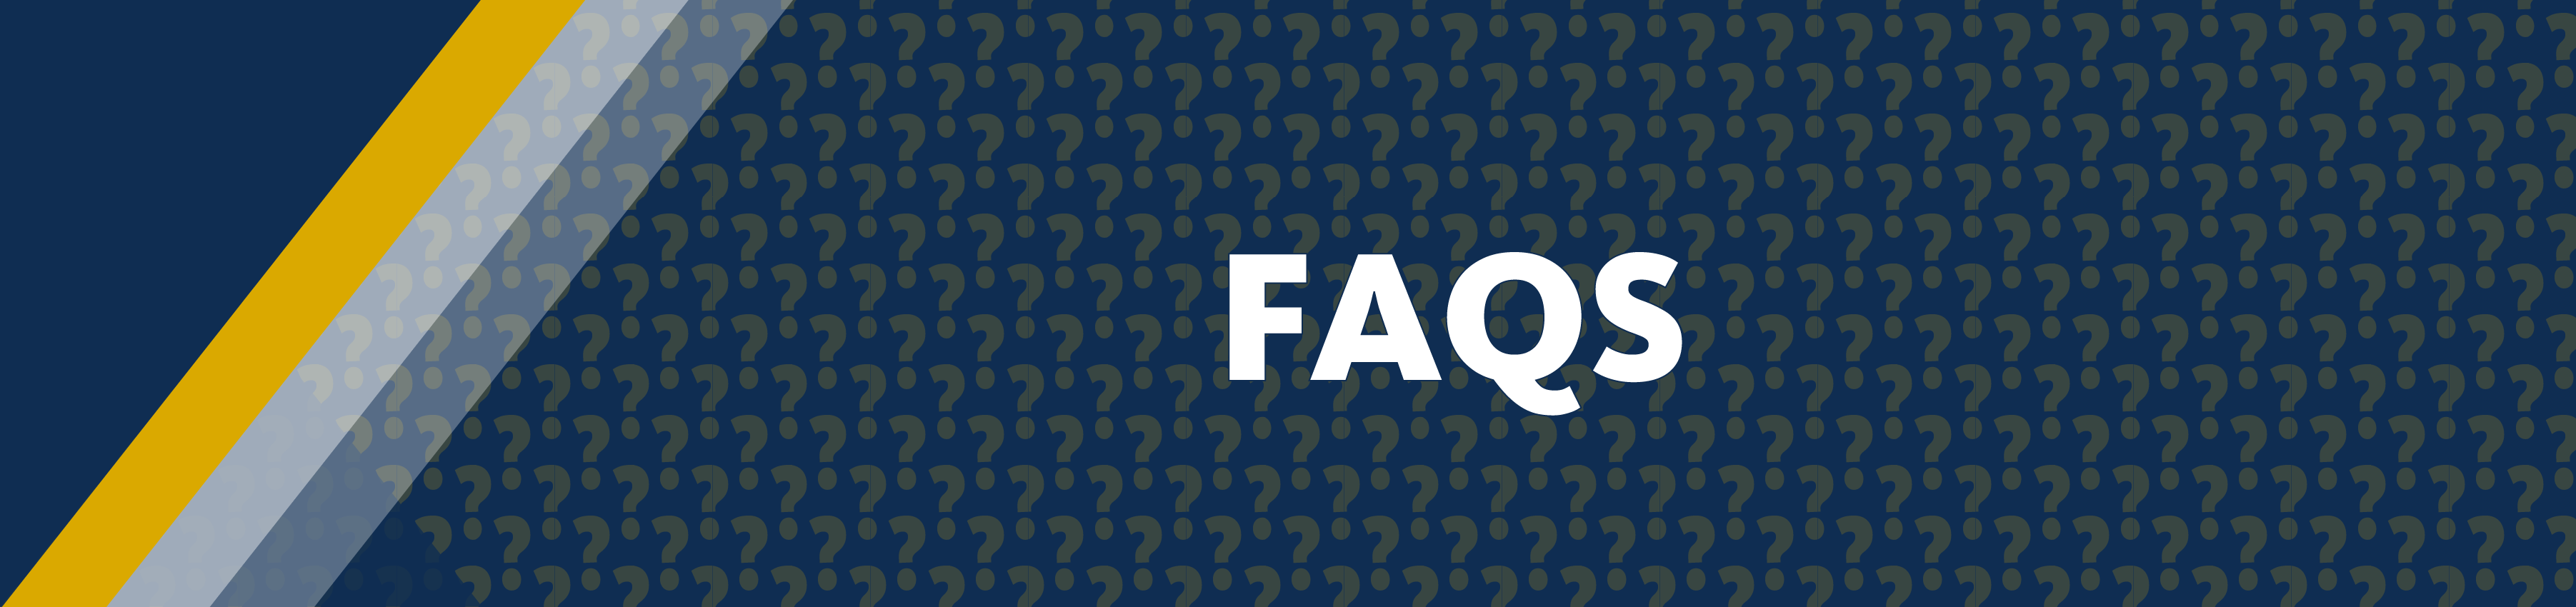 FAQ header image with questions background and text saying FAQ